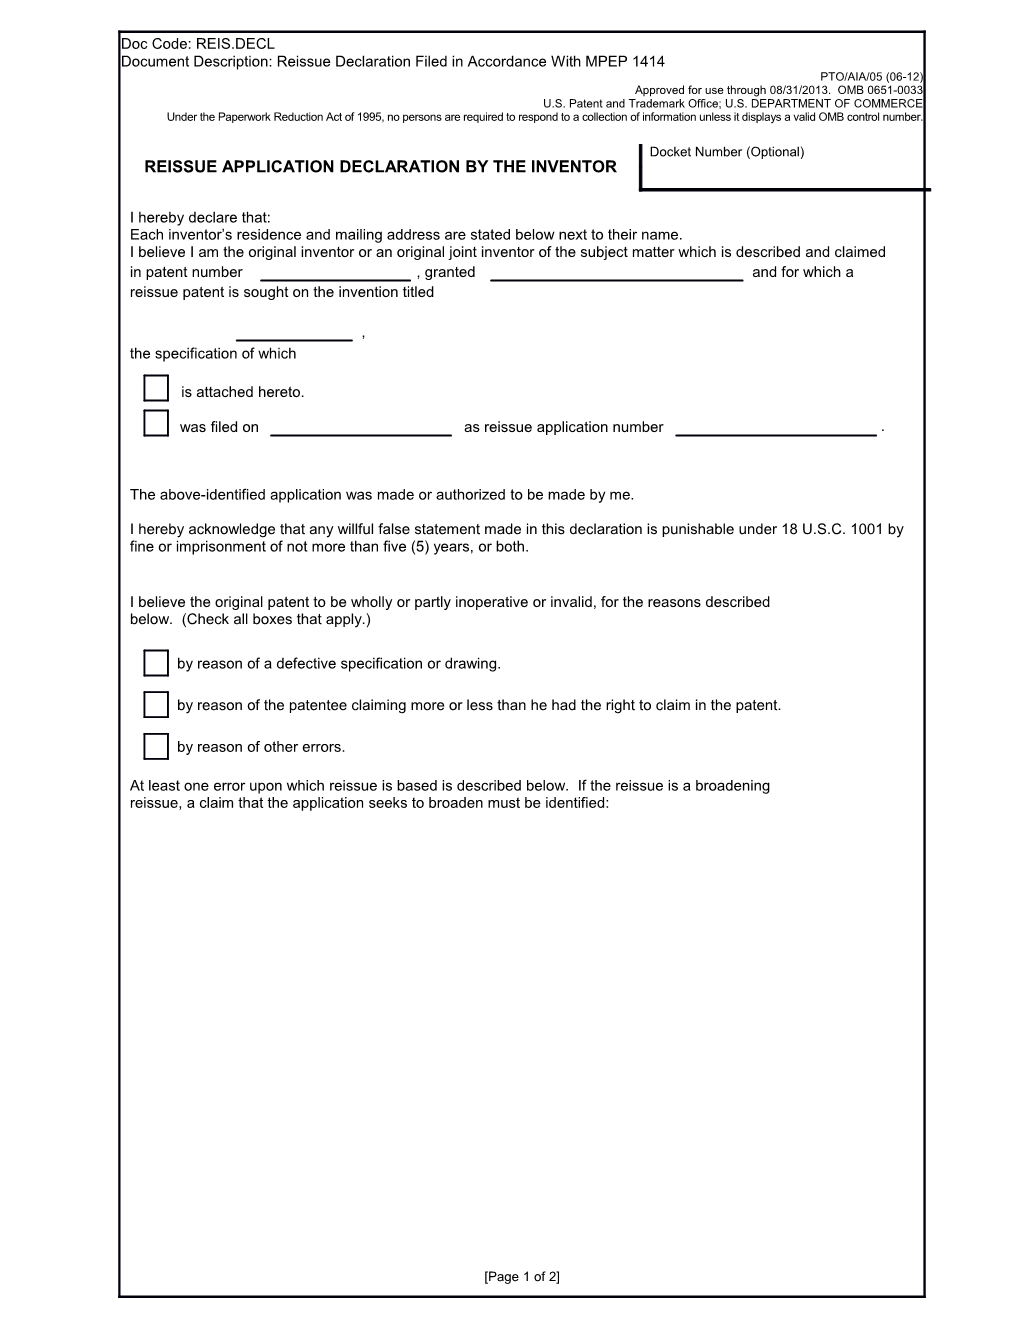 Reissue Application Declaration by the Inventor (PTO AIA-05).Dot